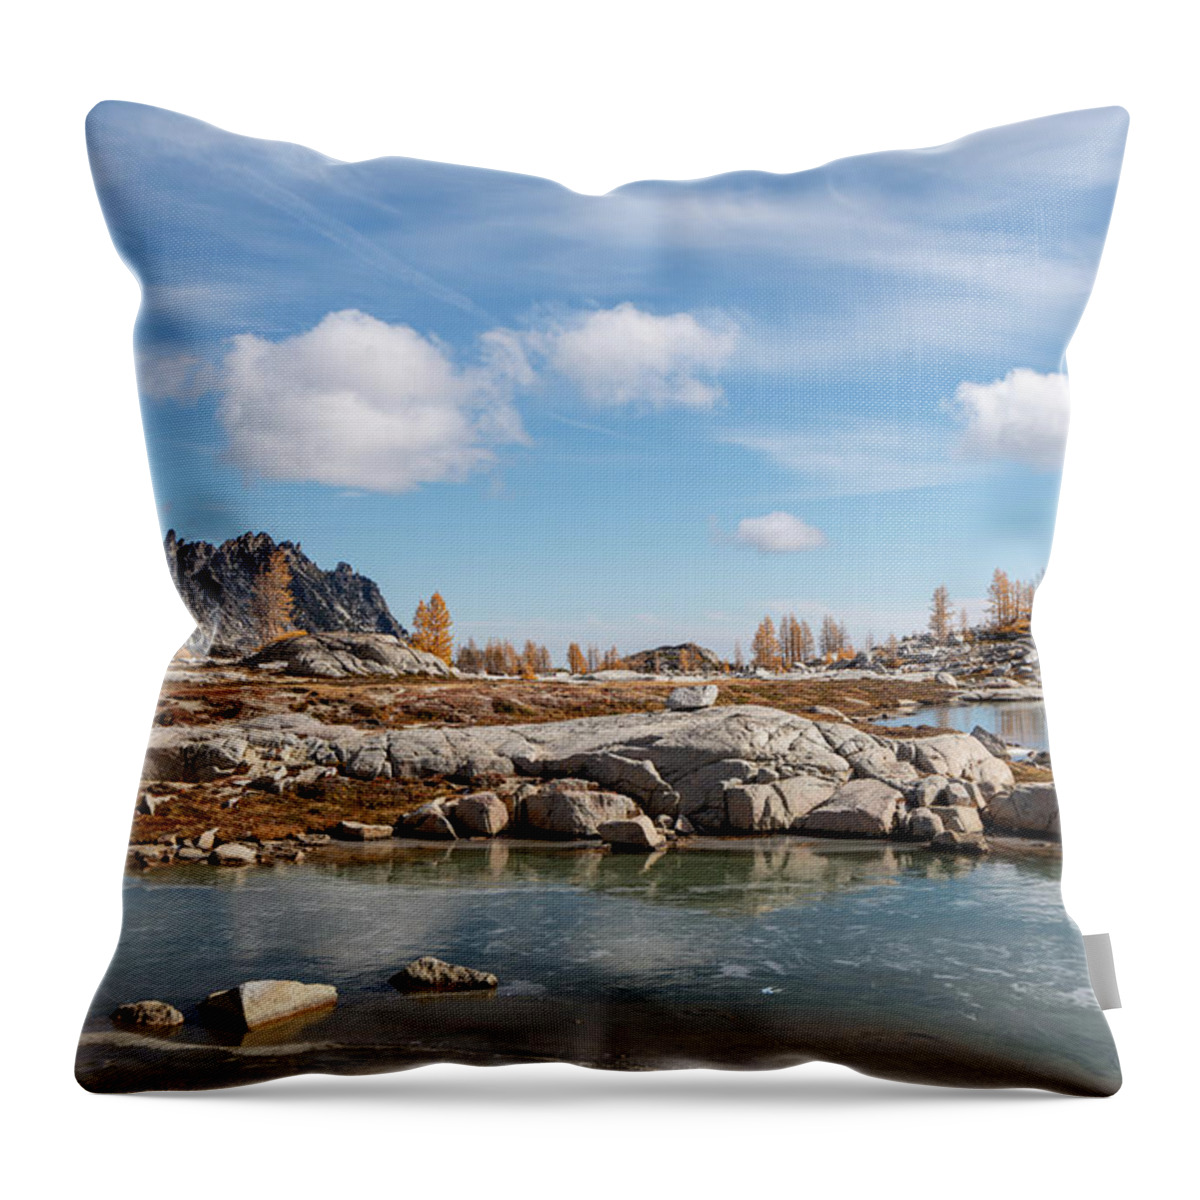 Outdoor; Day Hike; Fall; Color; Larch; Wilderness; Alps In Washington; The Enchantments; Pnw; Thru-hike; Throw Pillow featuring the digital art Upper Enchantments by Michael Lee